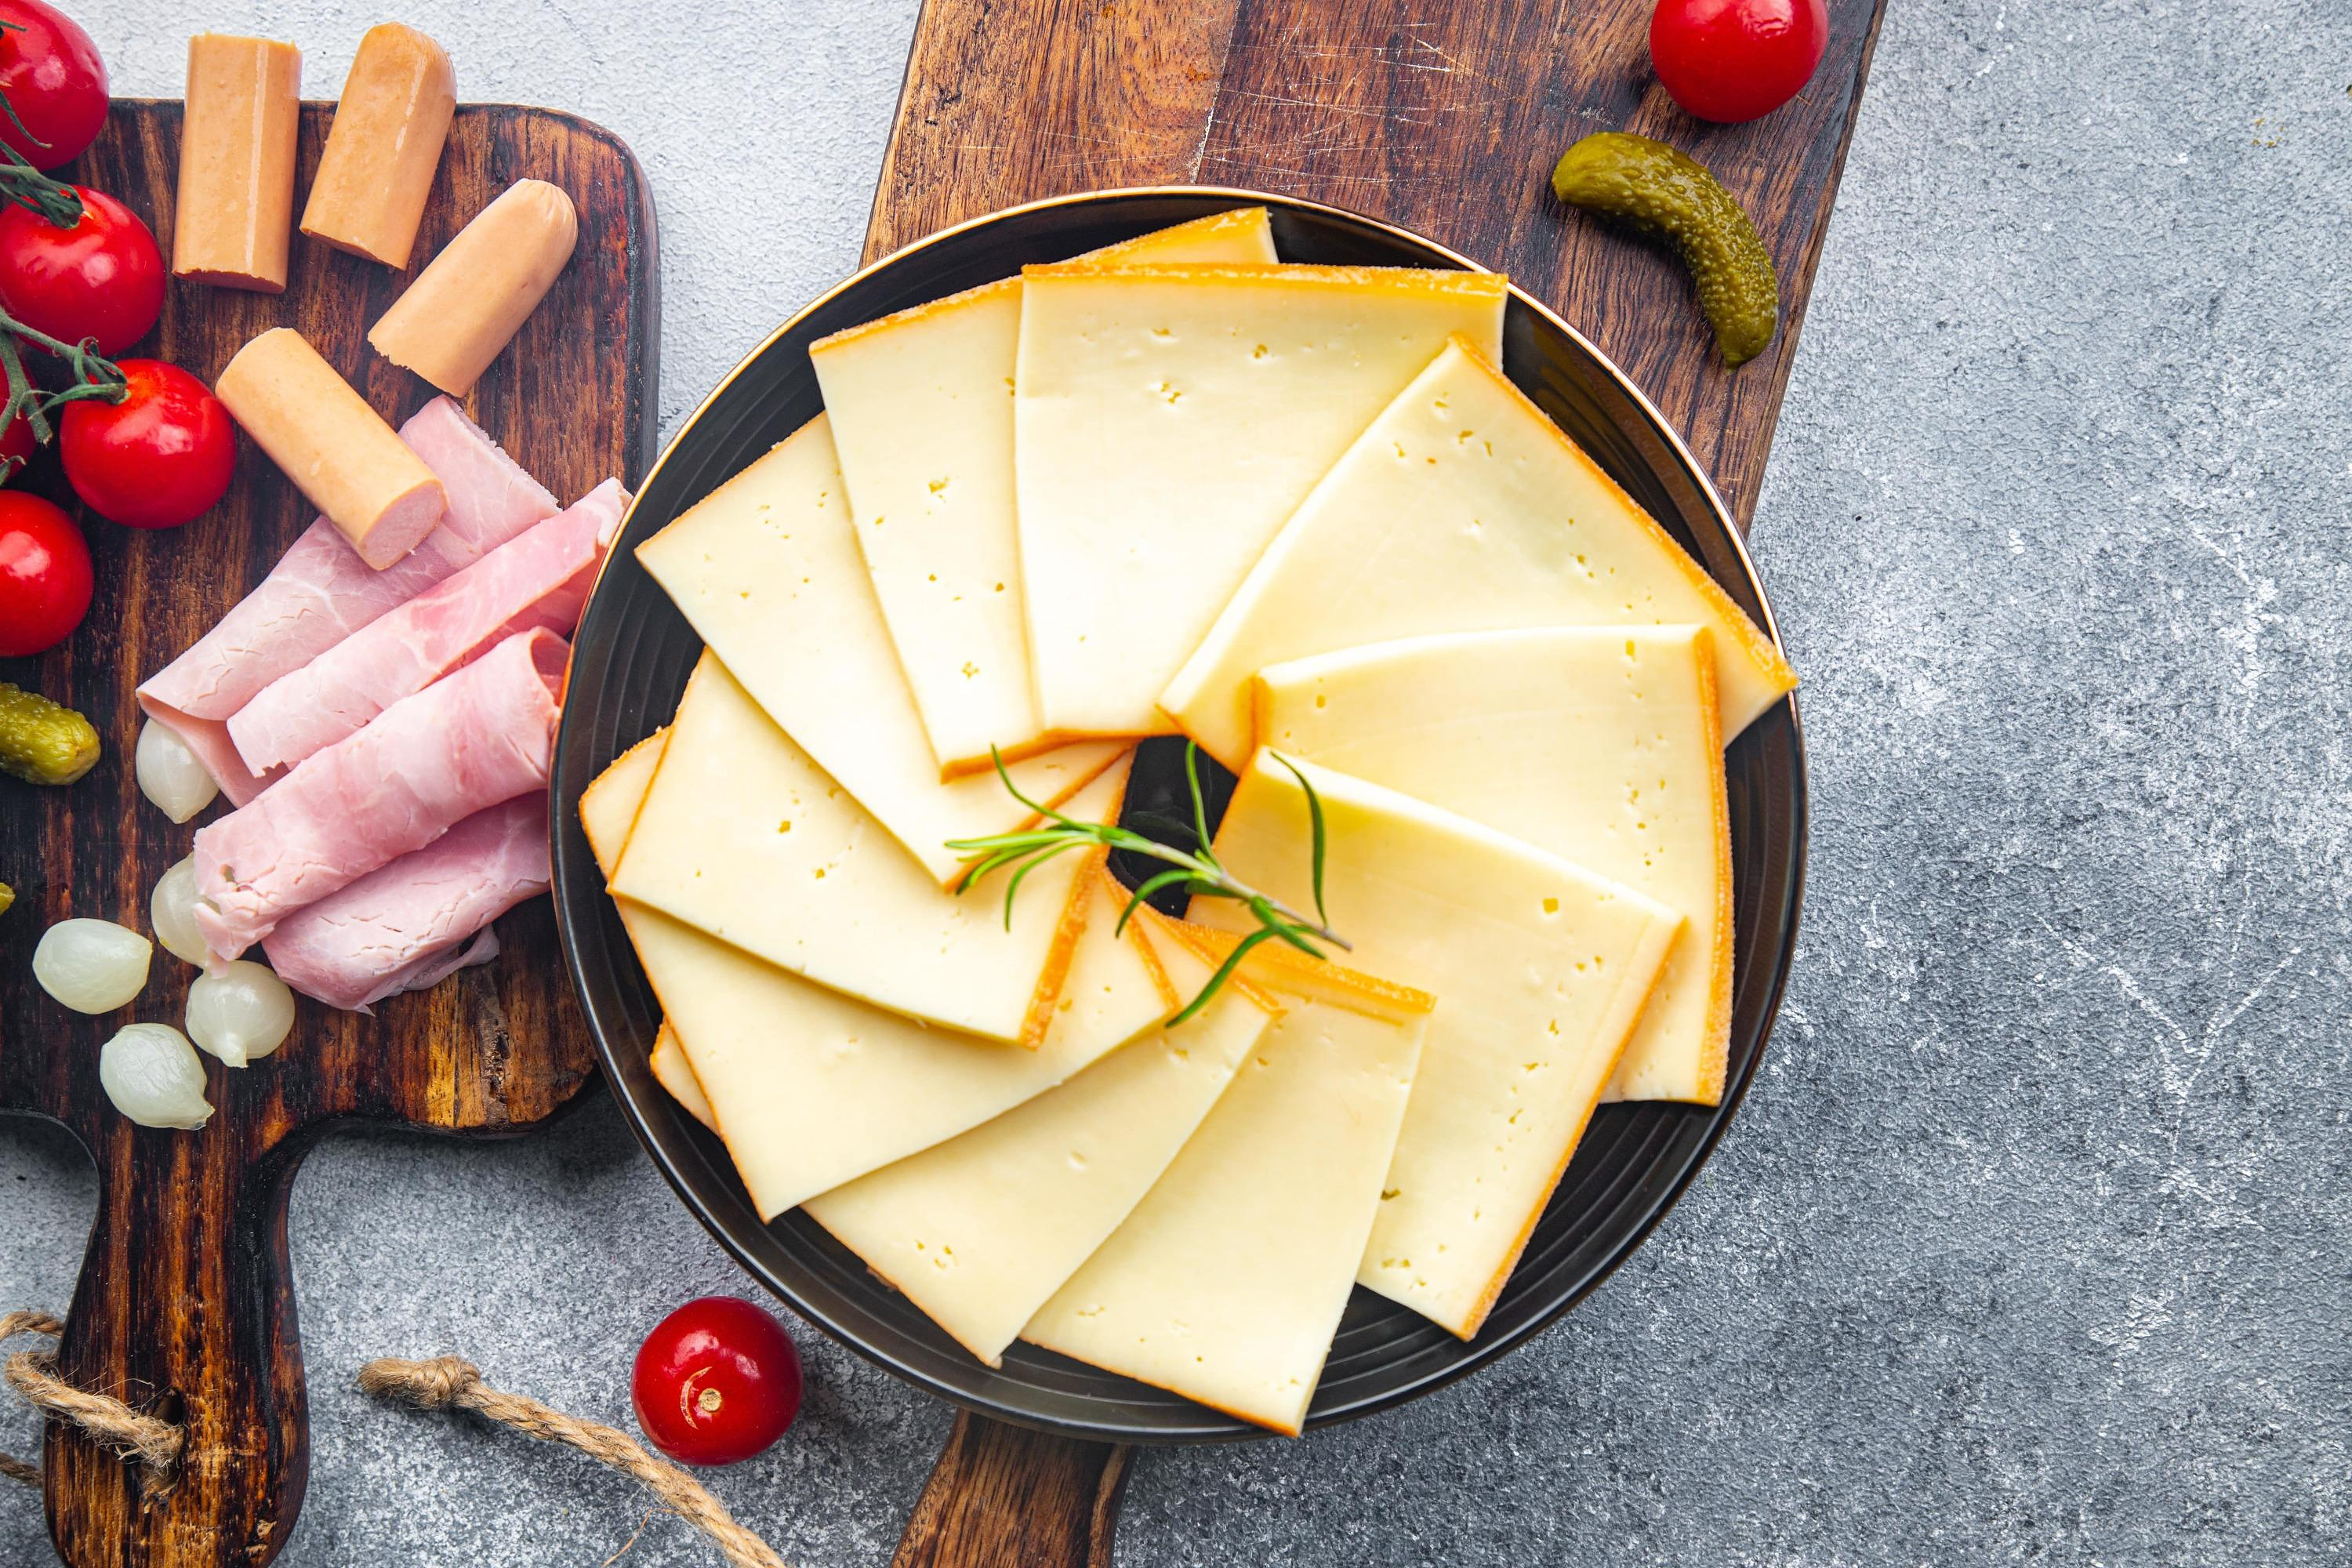 Raclette, morbier… Many cheeses sold in supermarkets recalled because of E. coli bacteria